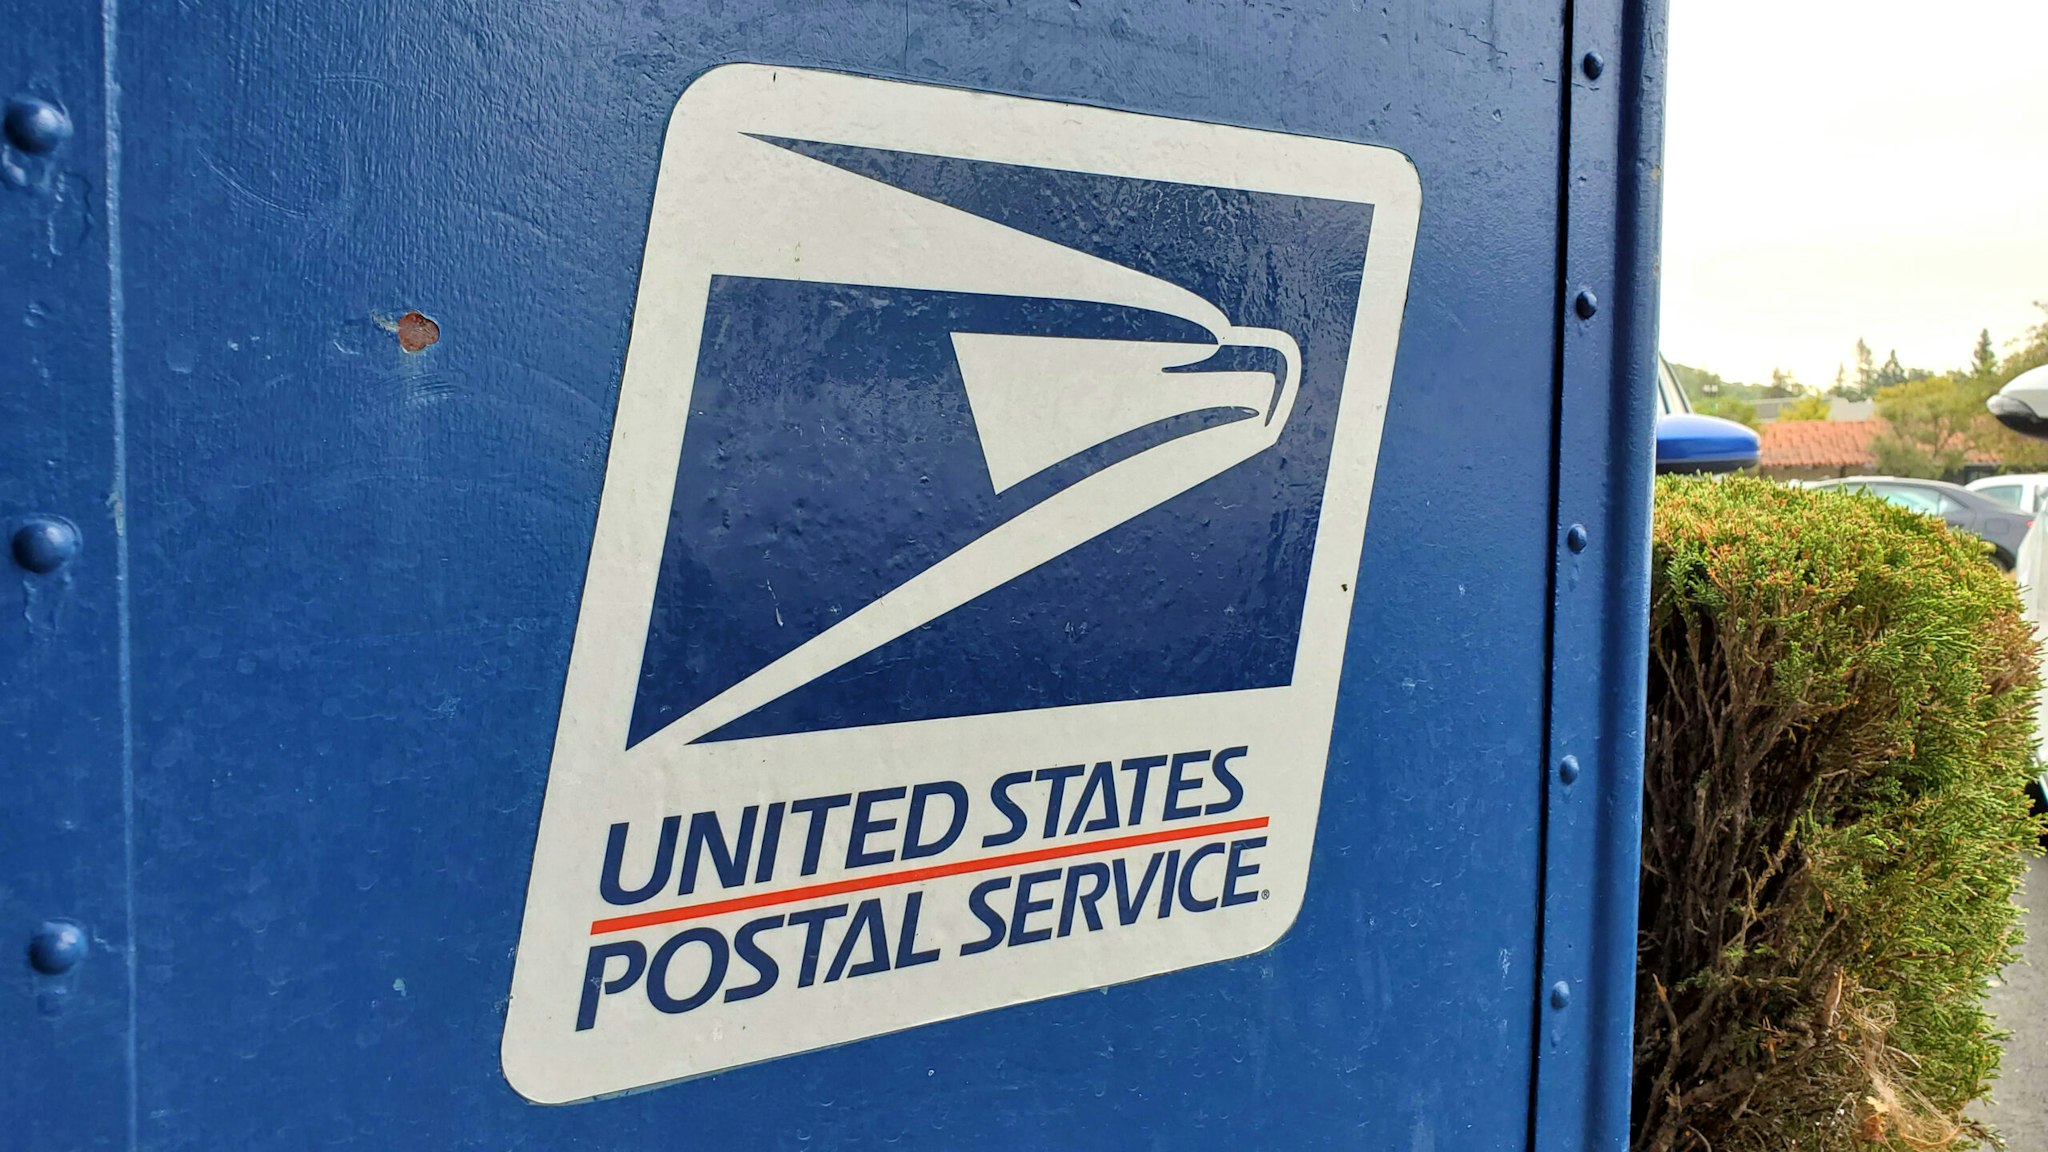 Close-up of logo for United States Postal Service (USPS) on mailbox in Lafayette, California, September 3, 2020.